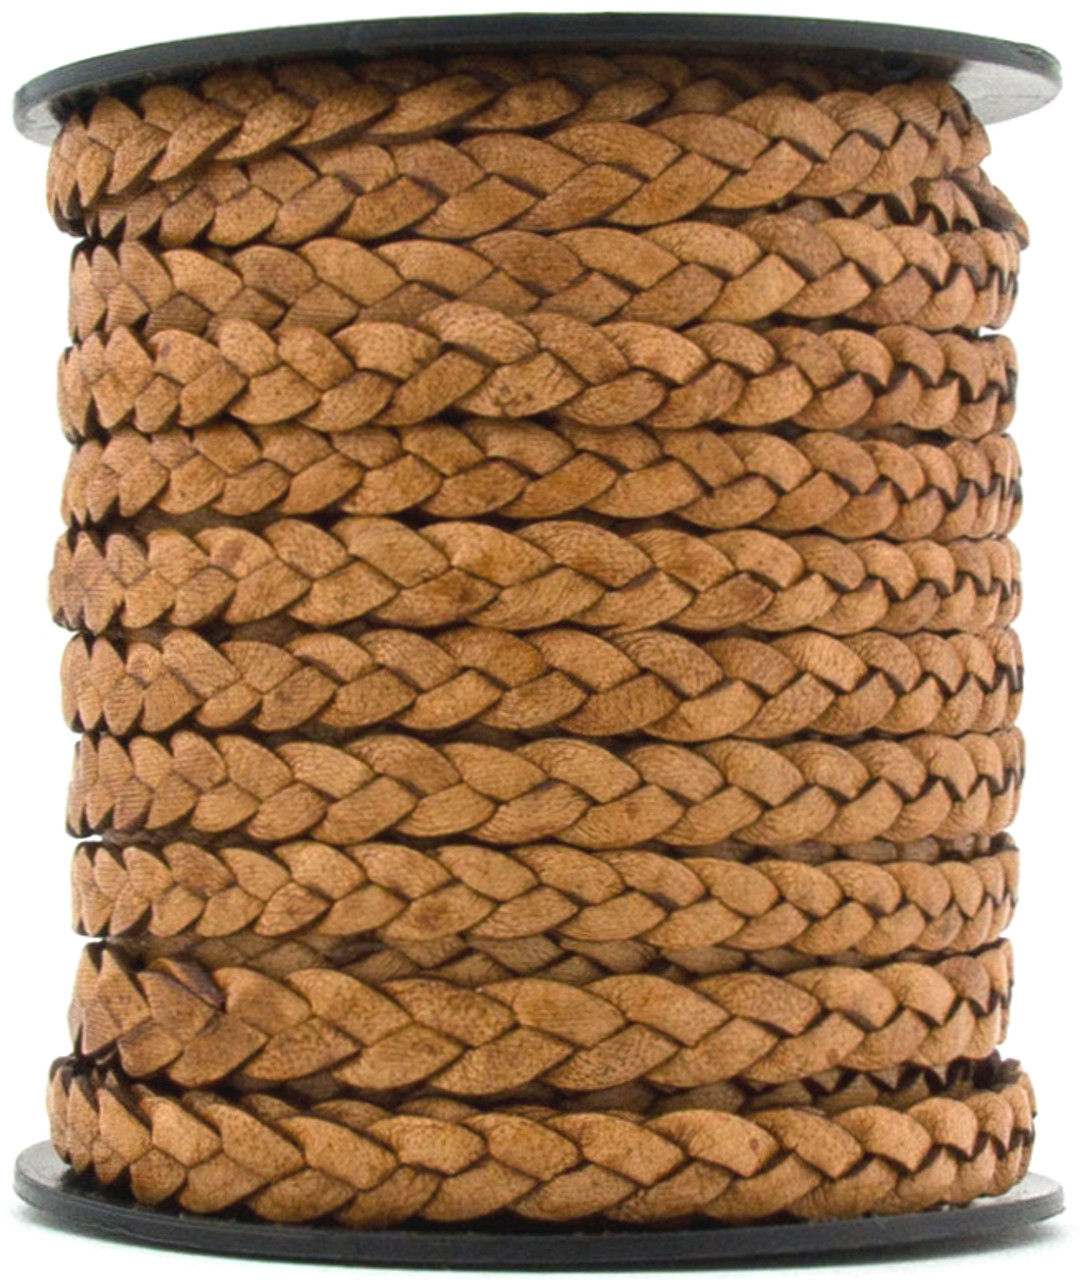 5mm Flat BRAIDED Leather Cord Genuine Flat Leather Cord Braided by